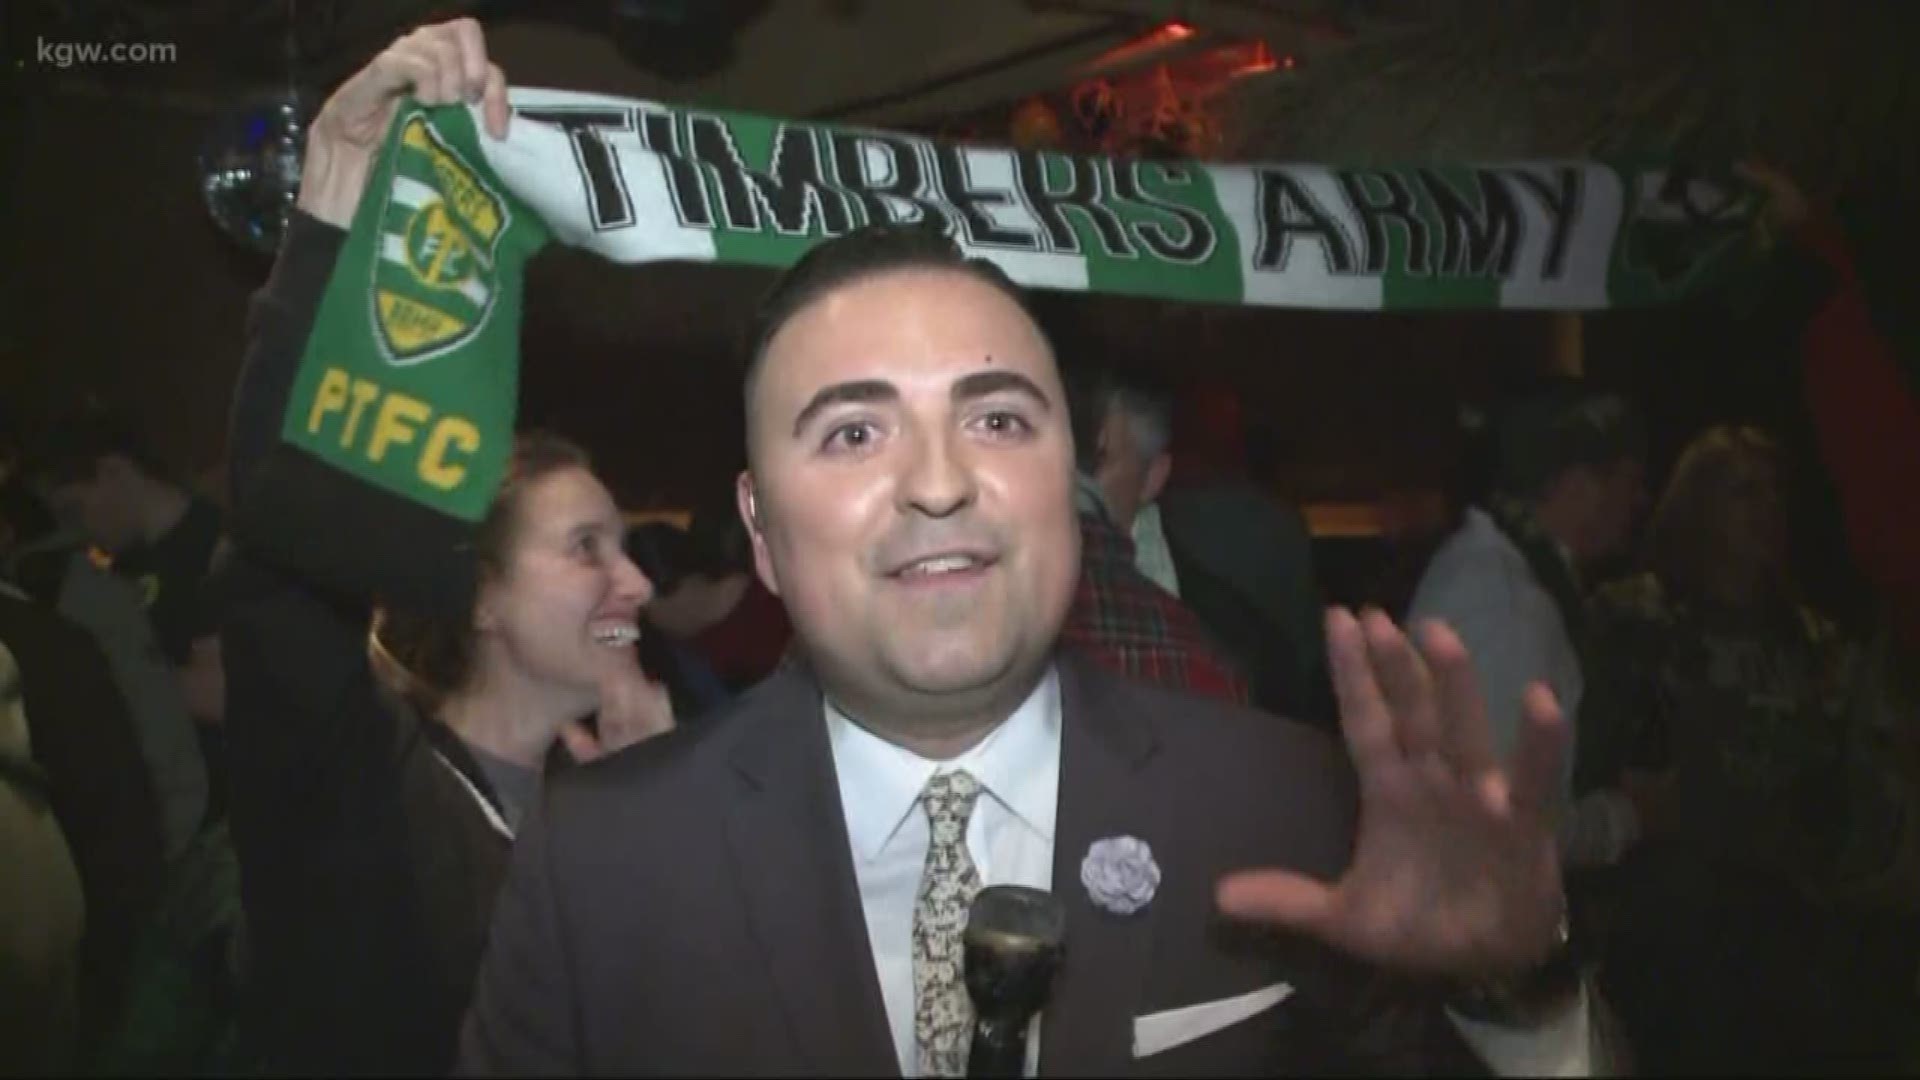 Timbers ready for MLS Cup